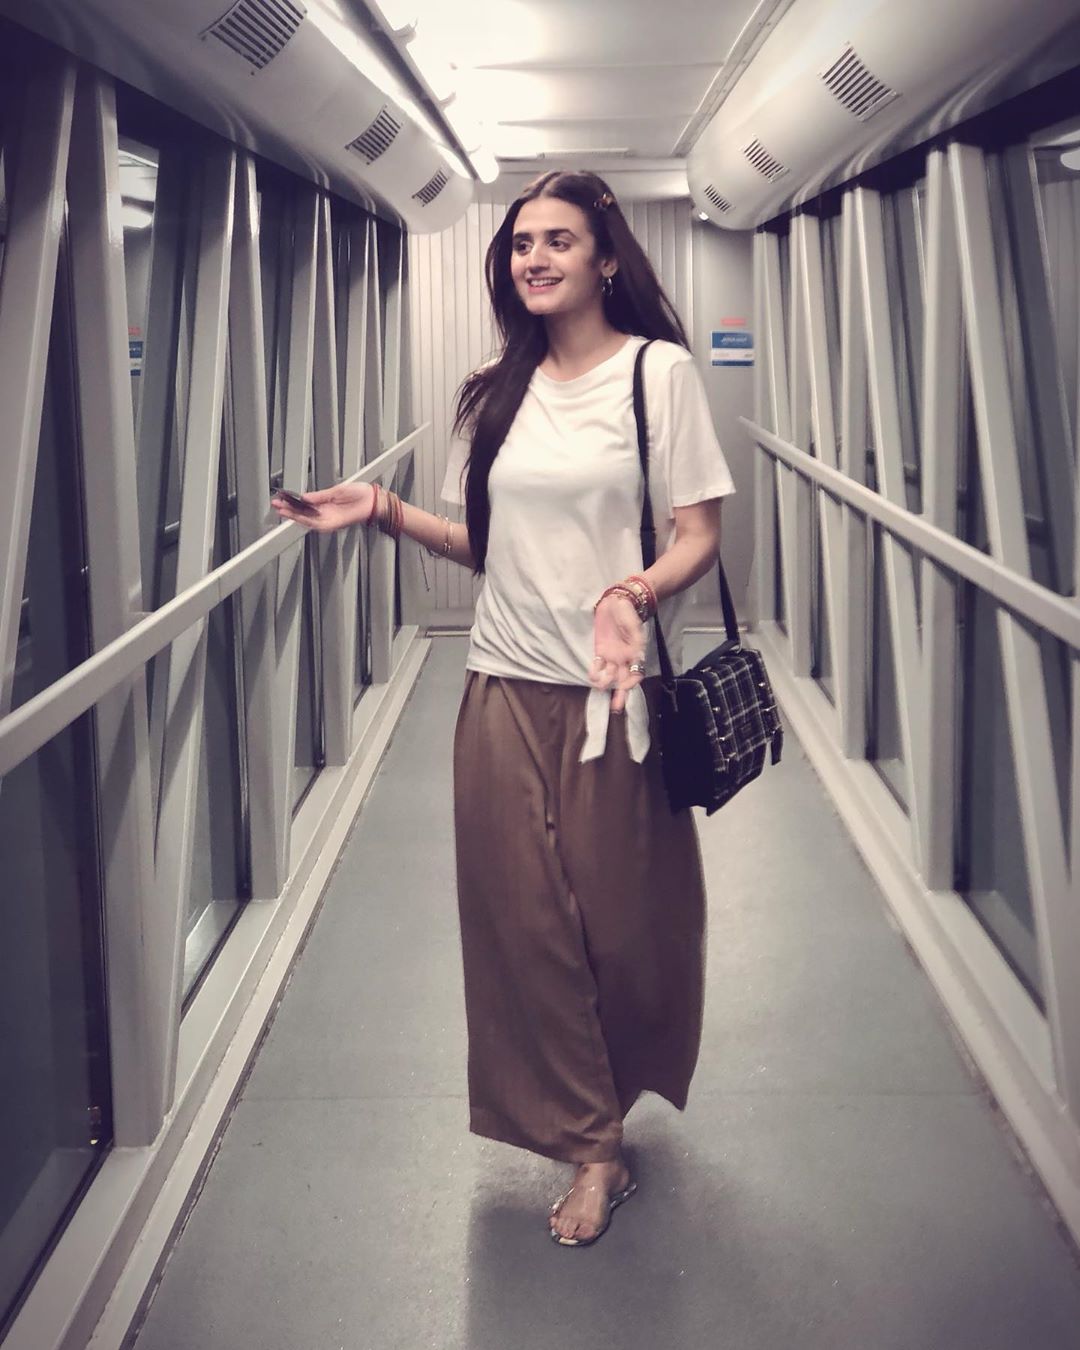 Some Latest Pictures of Actress Hira Mani